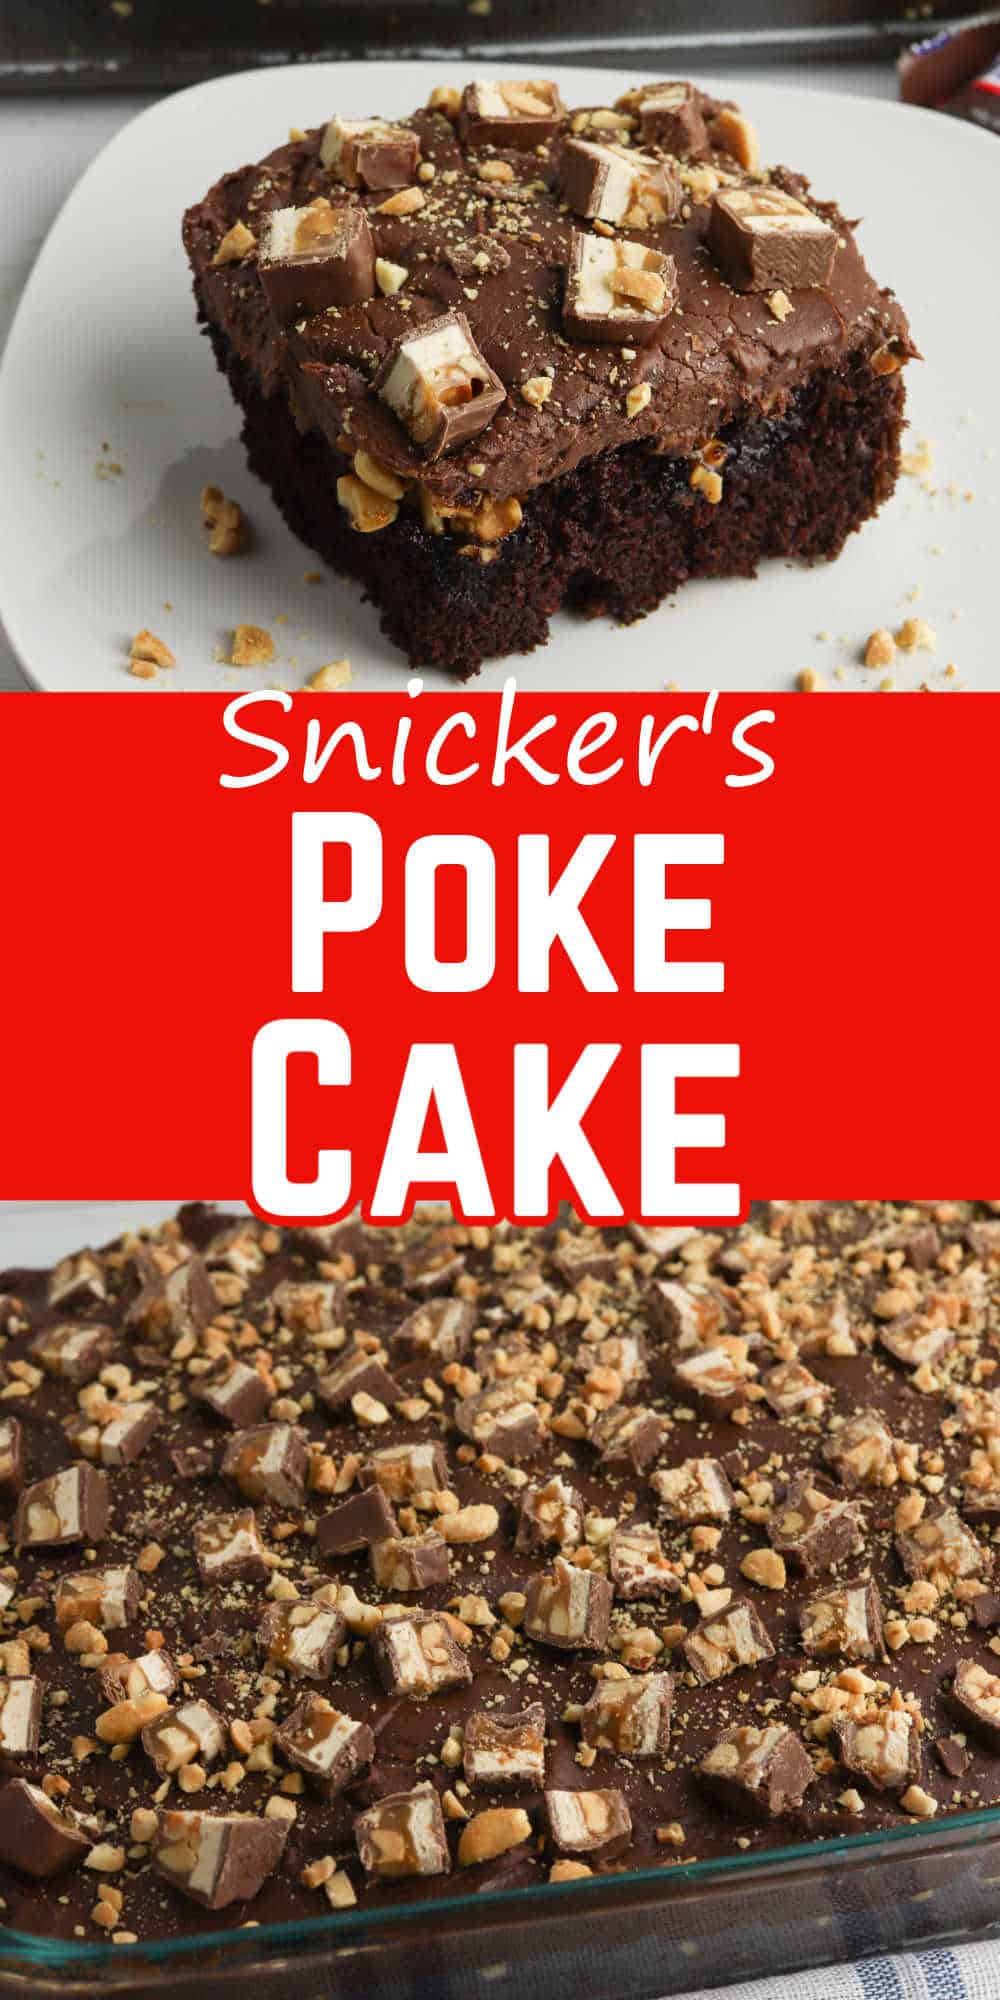 pin image collage: top has slice of snickers poke cake, middle says "Snickers Poke Cake" and bottom has cake in pan.